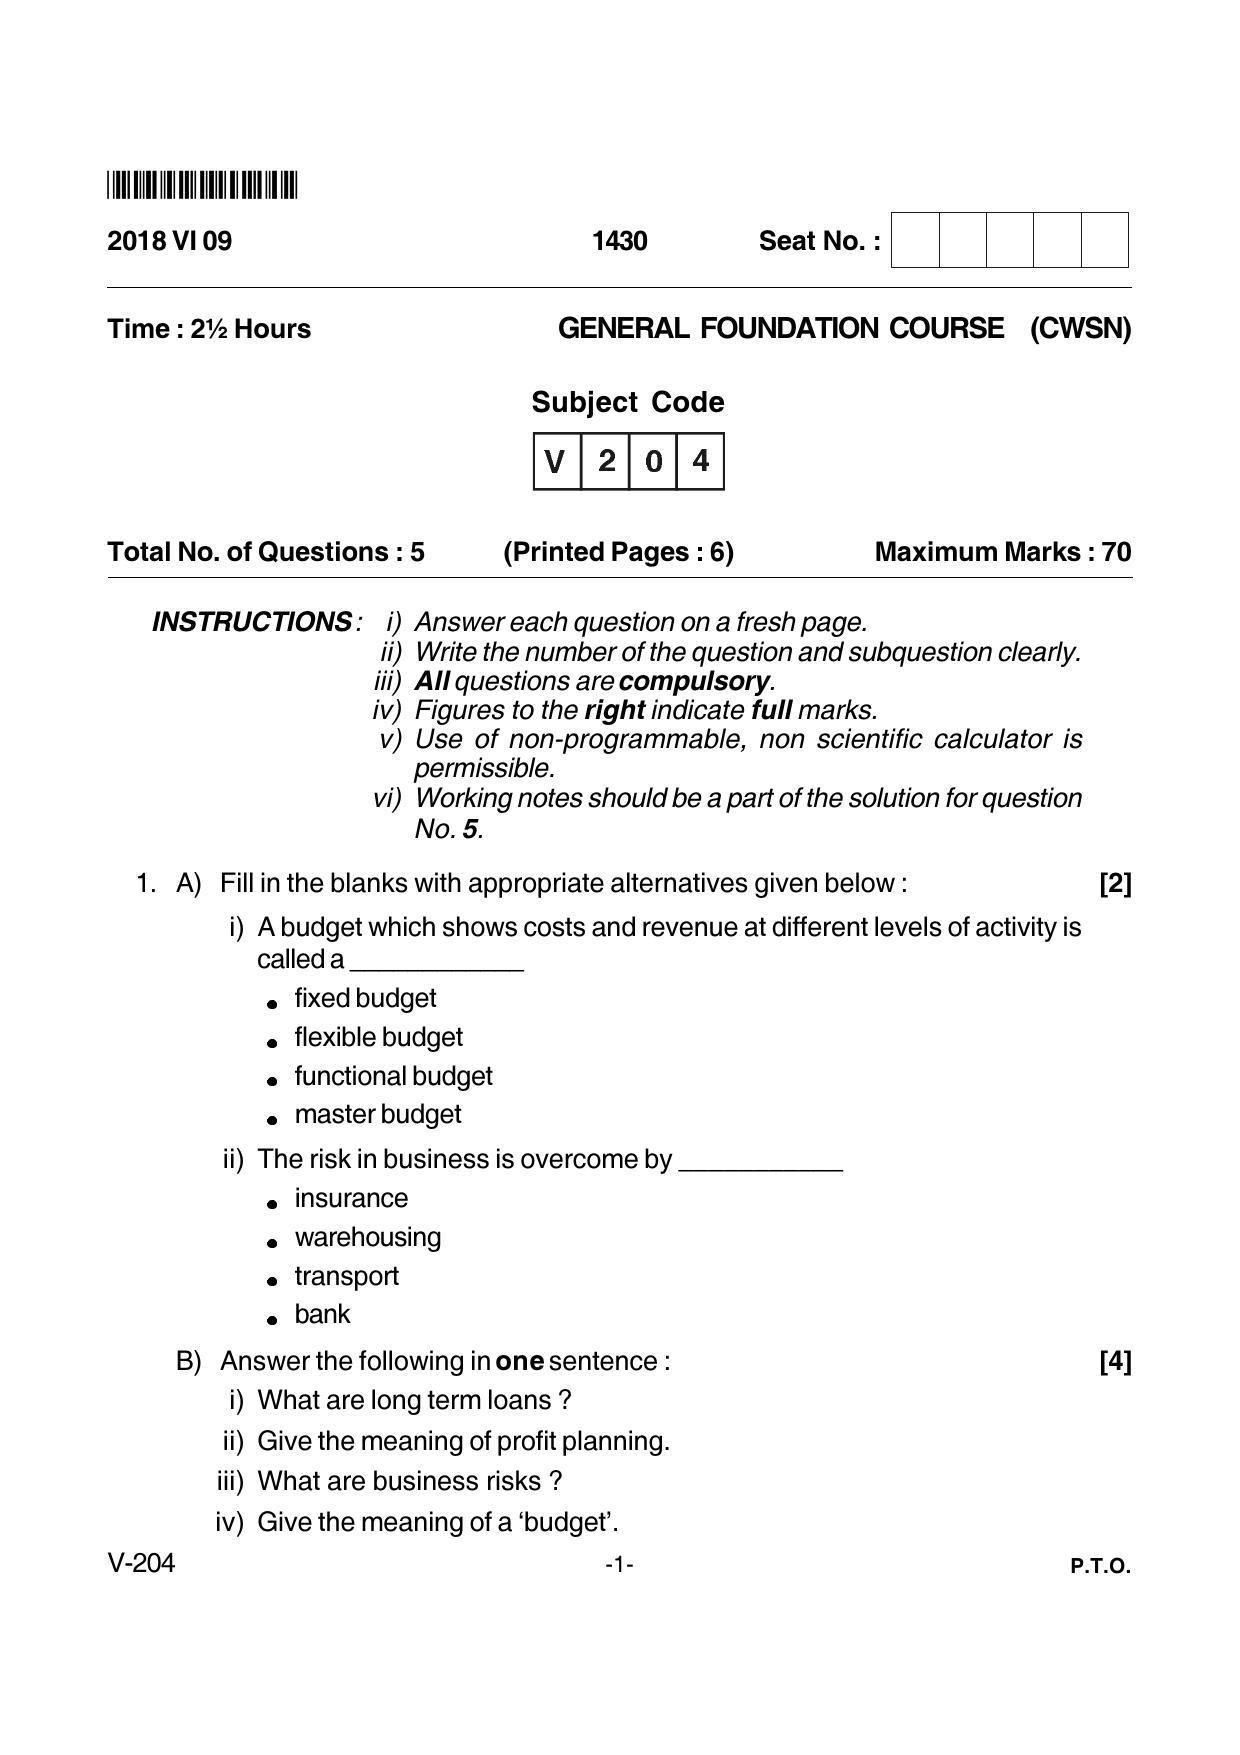 Goa Board Class 12 General Foundation Course (CWSN)  Voc 204 Cwsn (1) (June 2018) Question Paper - Page 1